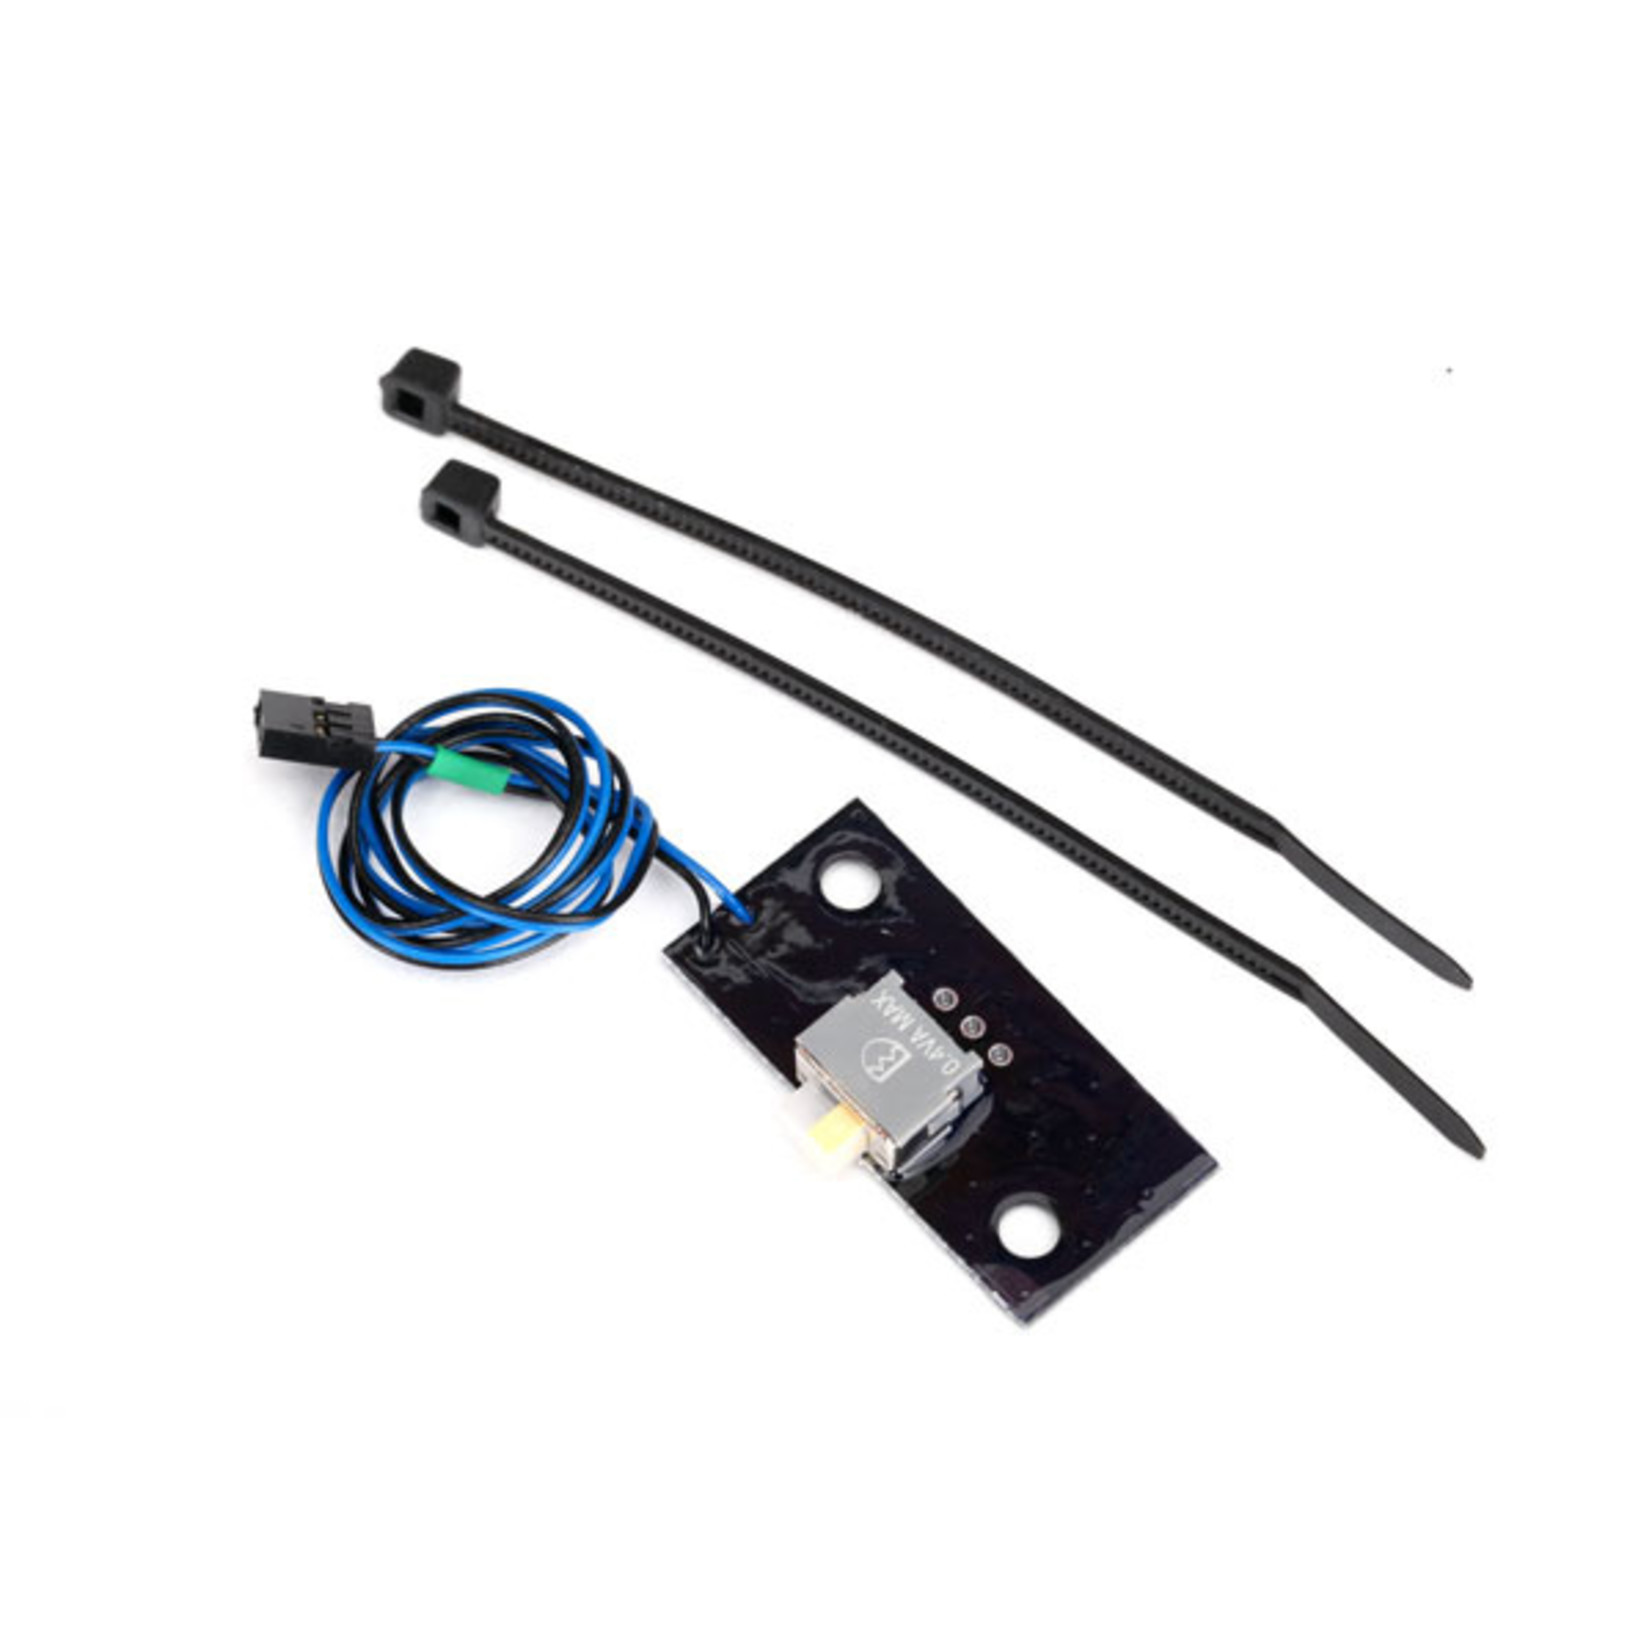 Traxxas 8037 - LED lights, high/low switch (for #8035 or #